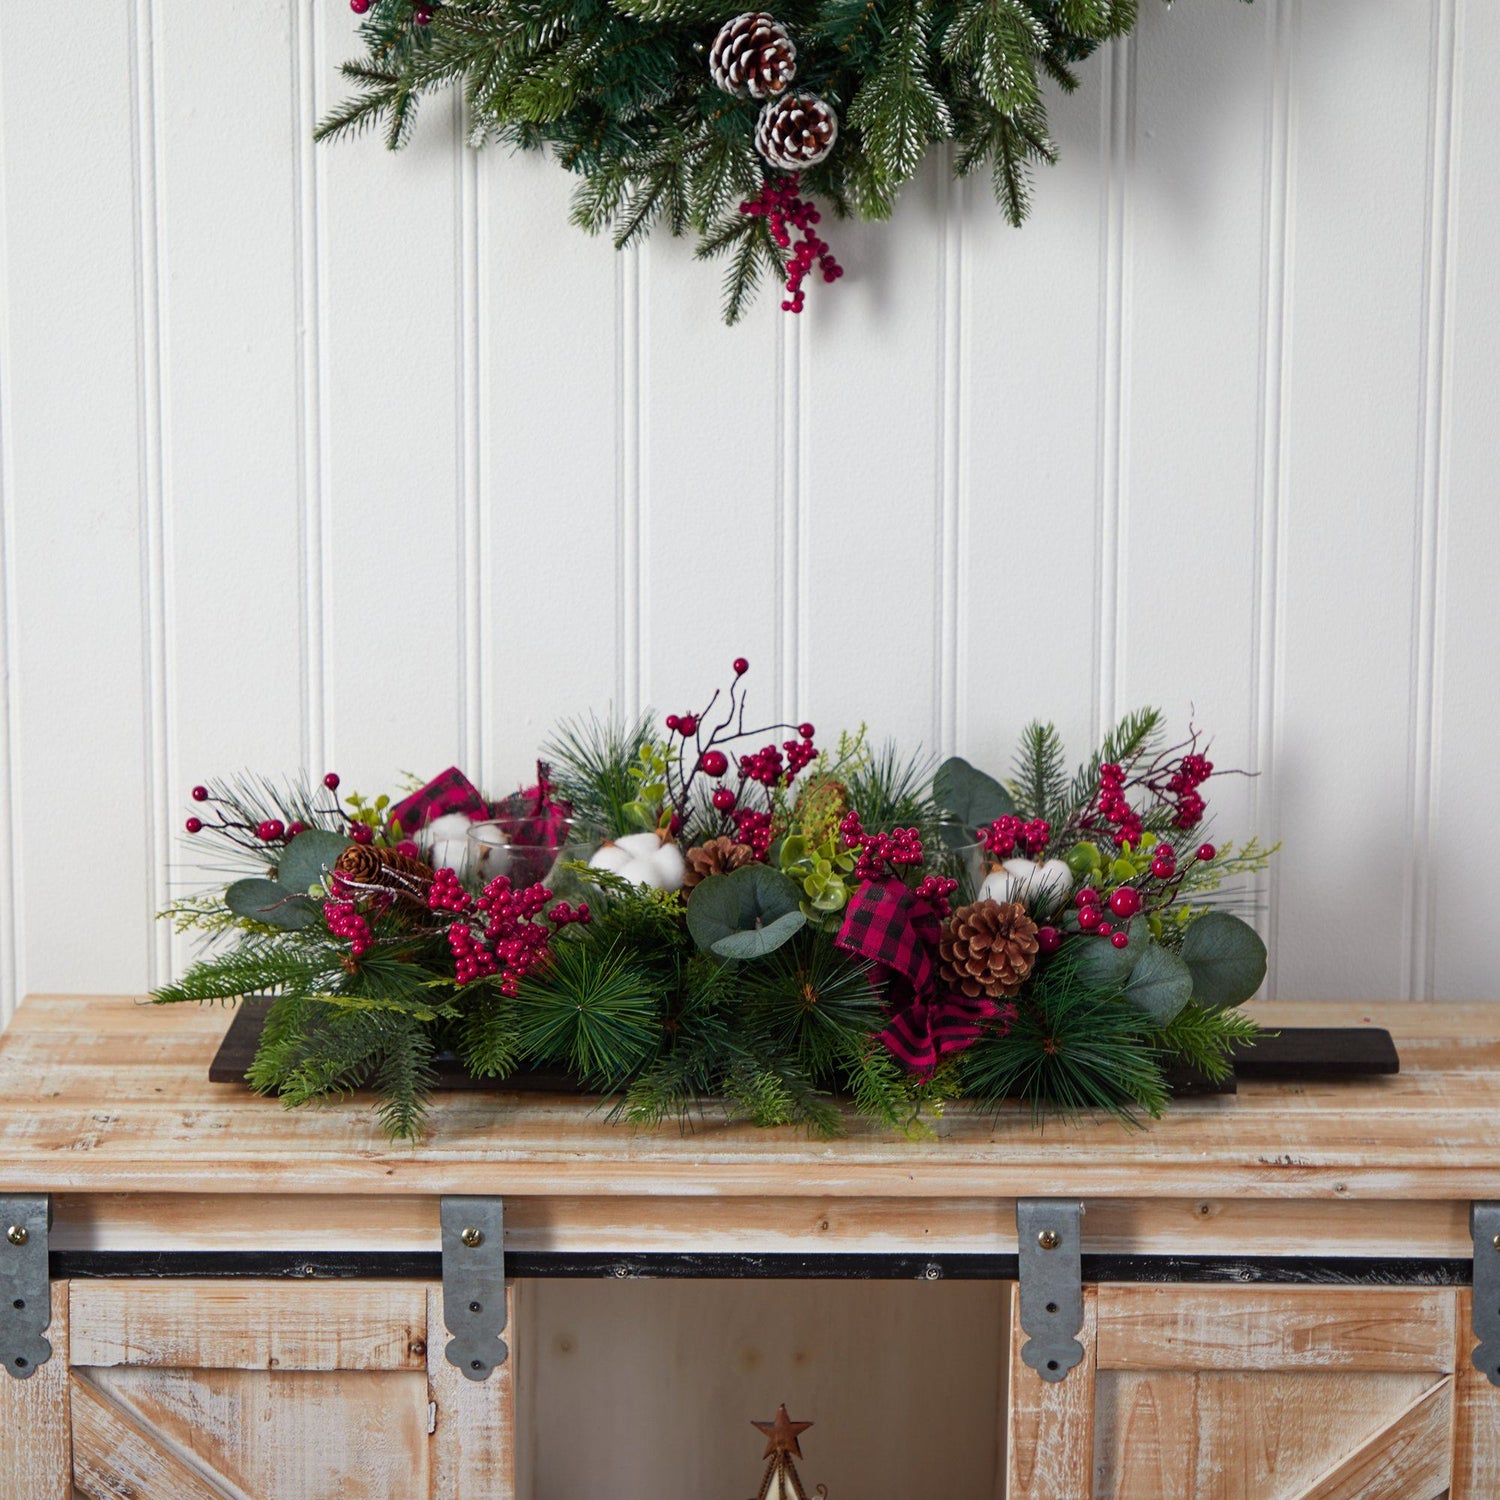 24” Holiday Berries, Pinecones and Eucalyptus Cutting Board Wall Décor or Table Arrangement